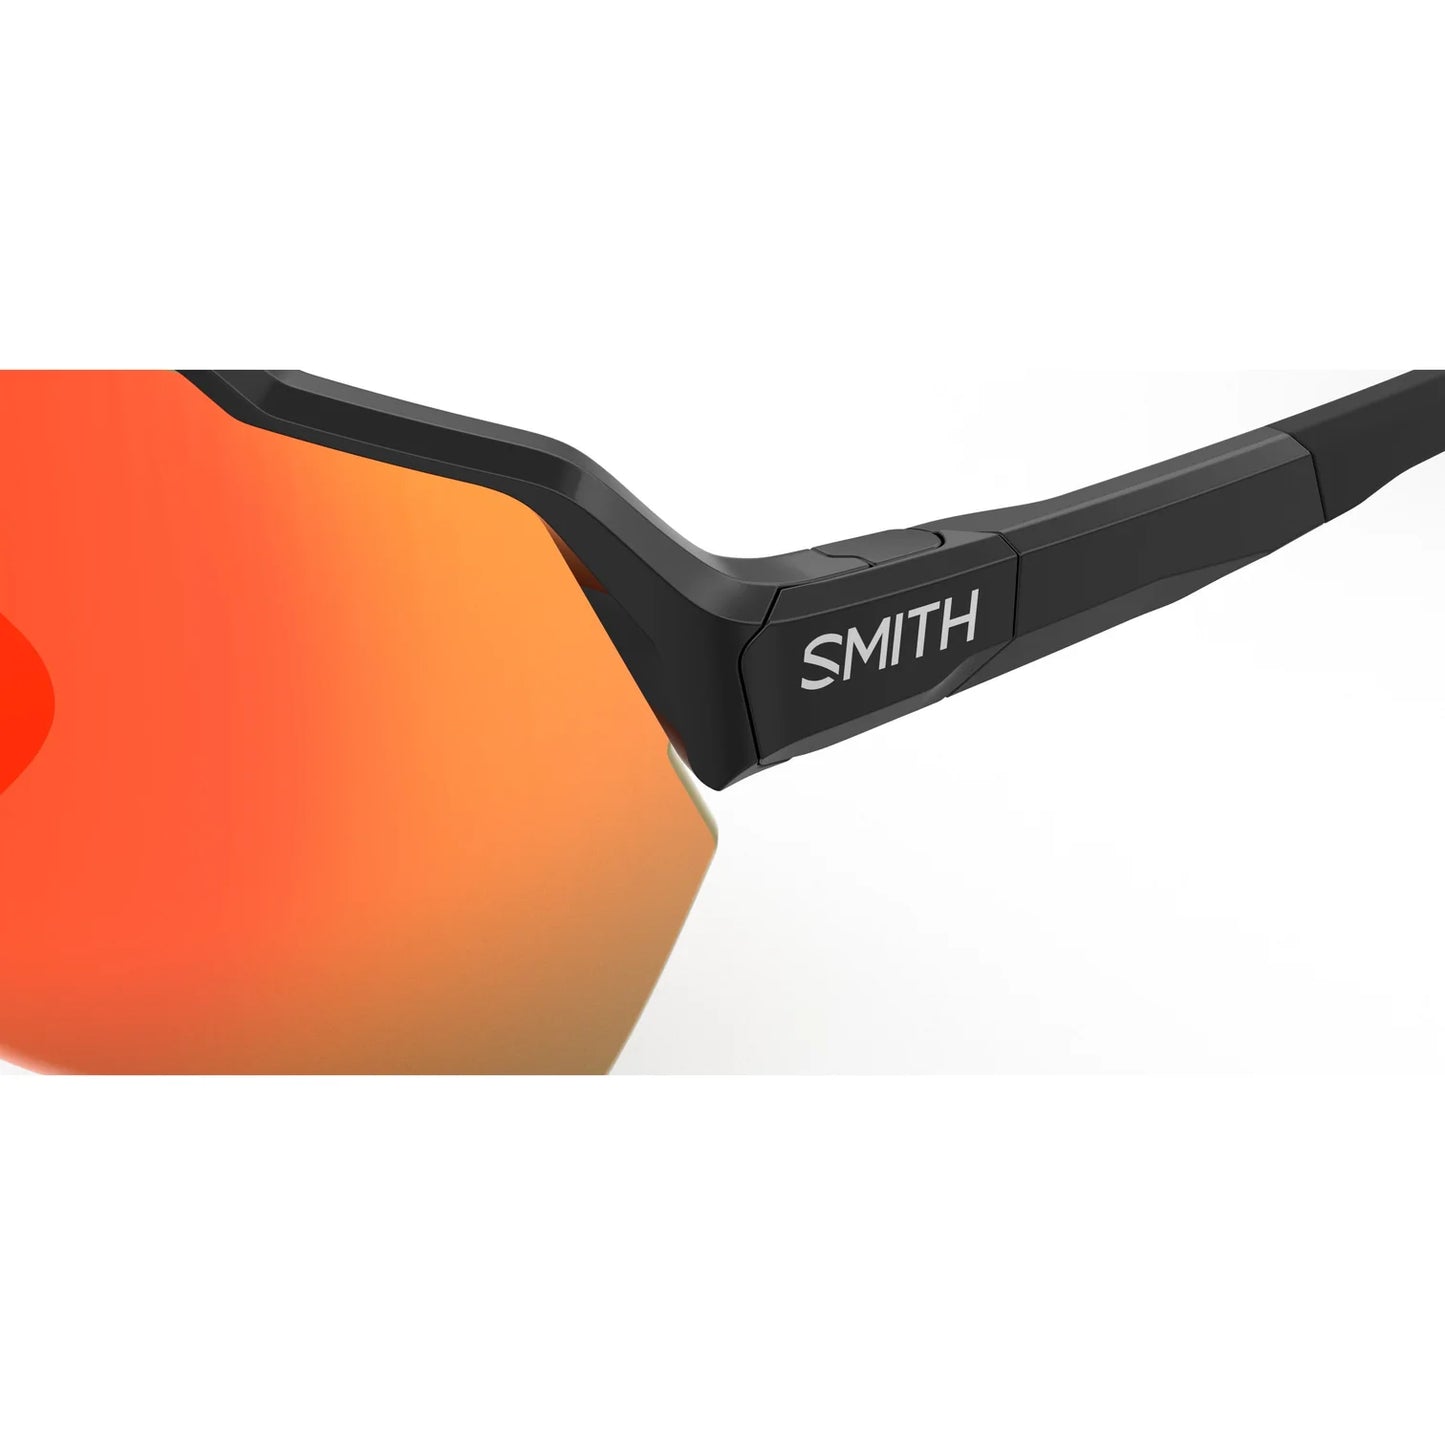 Smith Shift Split Mag Sunglasses - One Size Fits Most - Black - ChromaPop Red Mirror Lens